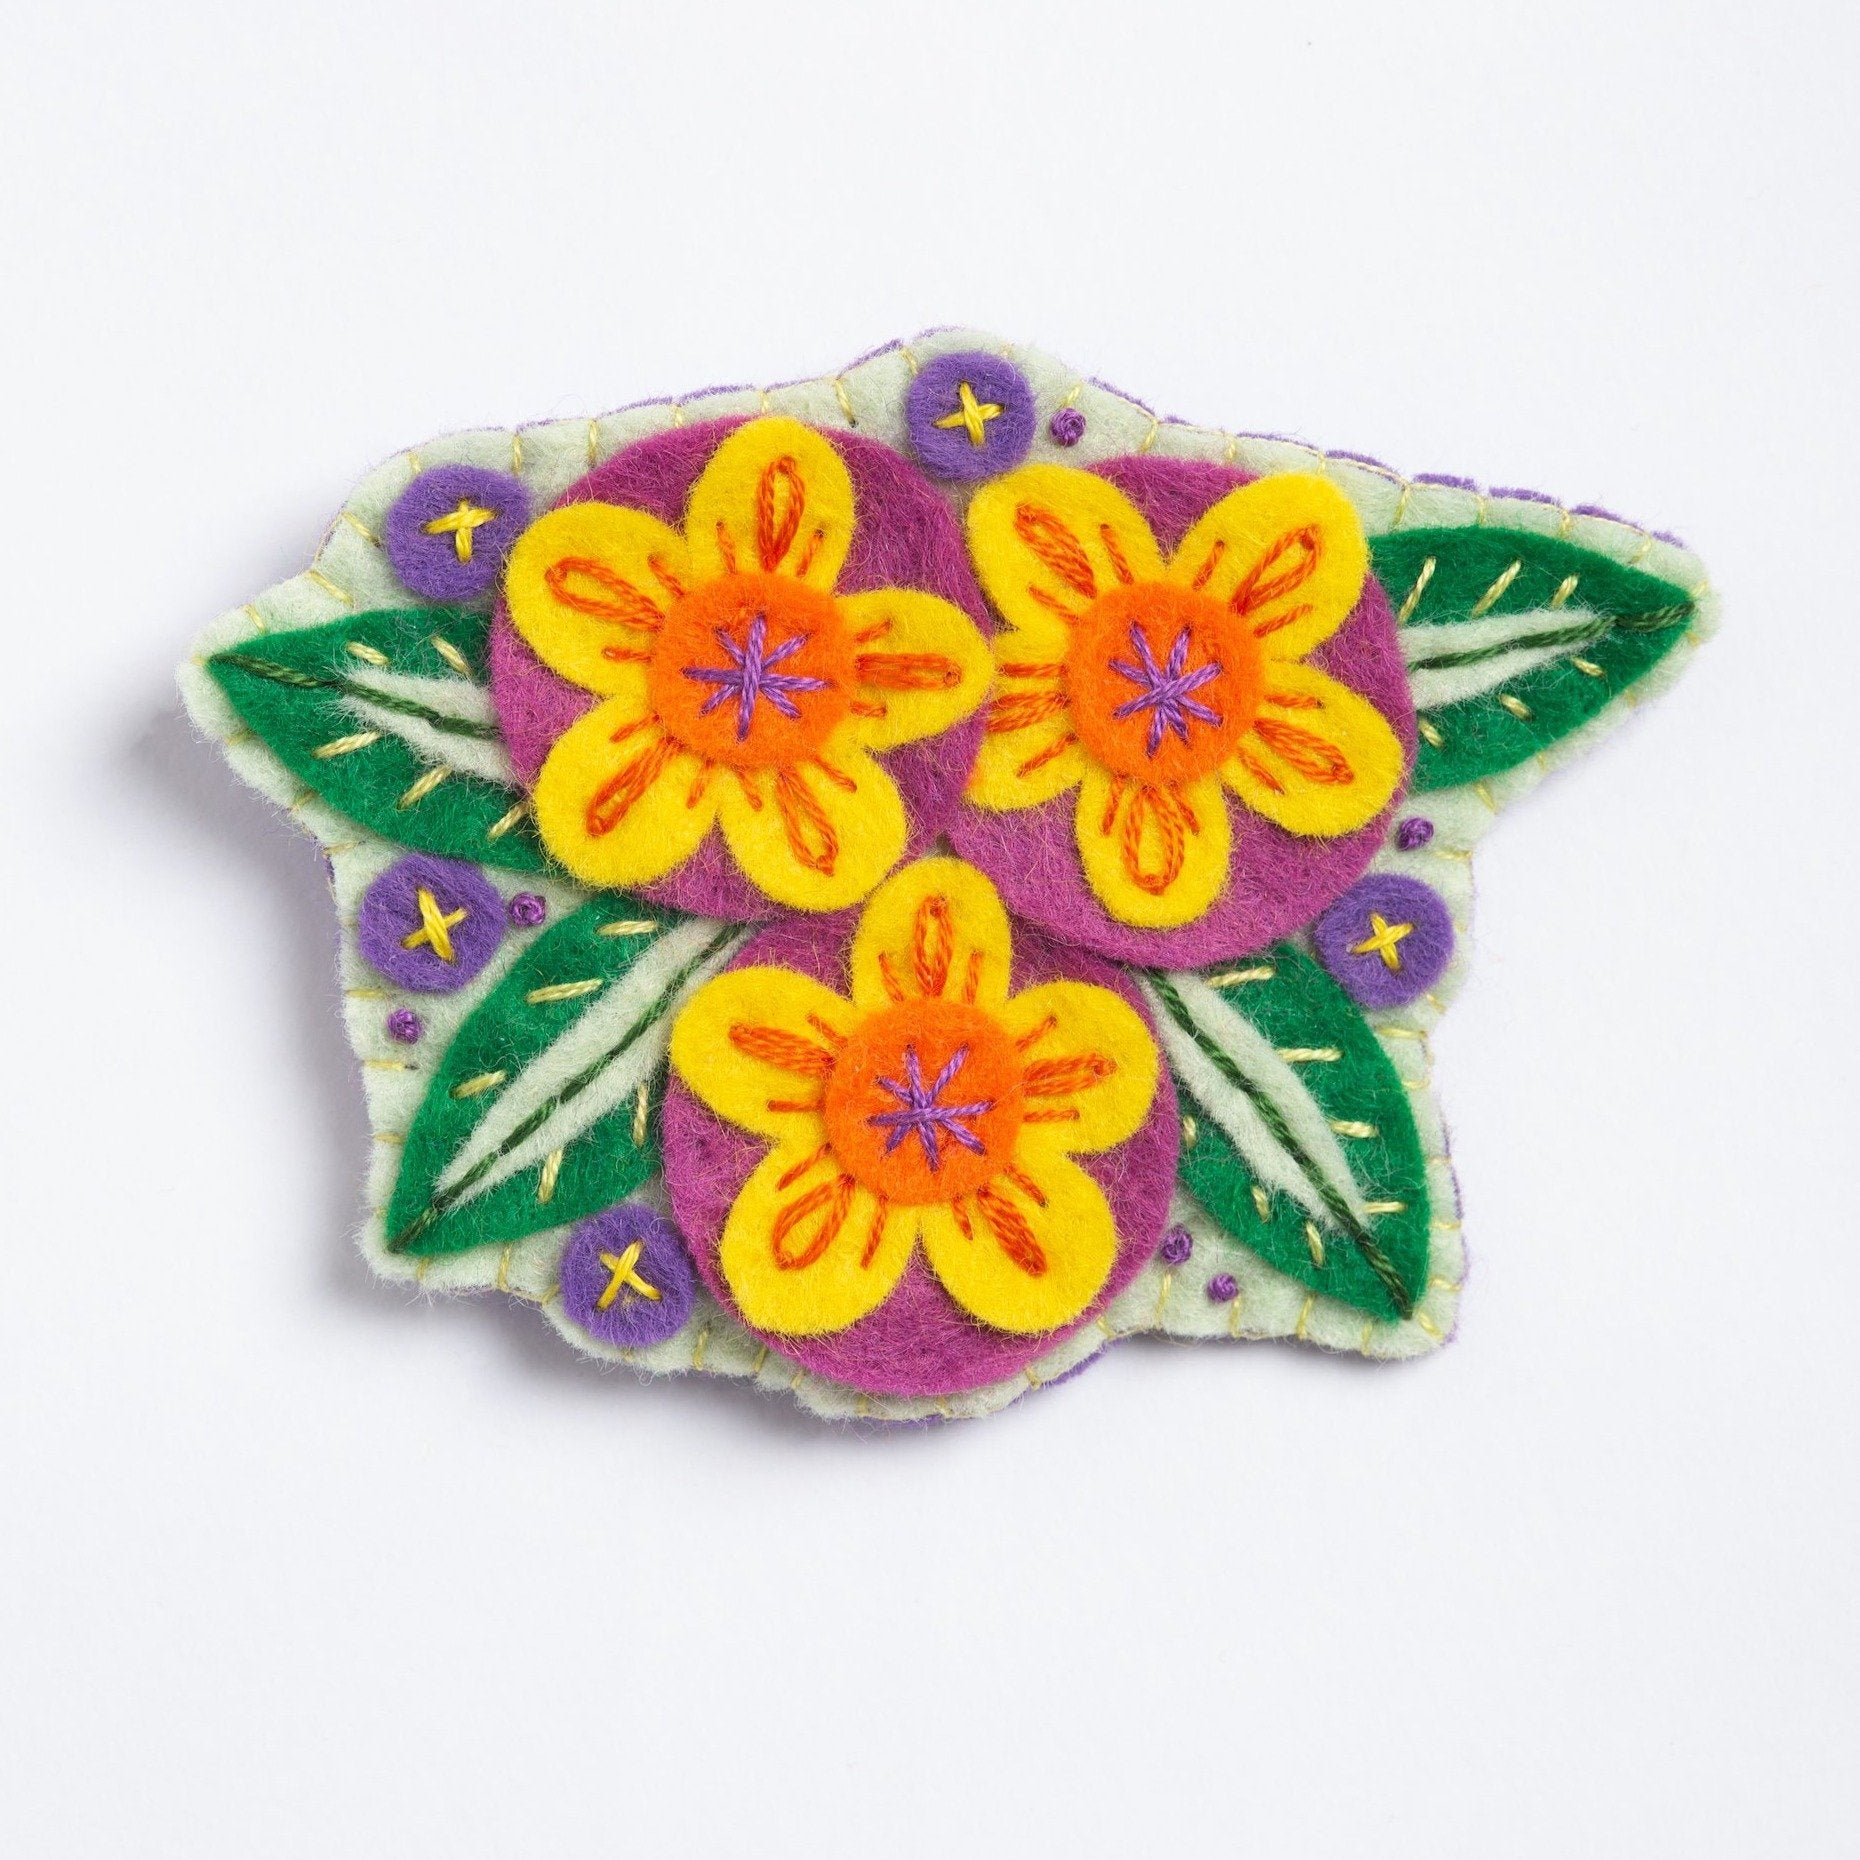 clipped image of penelope flower brooch on white background.